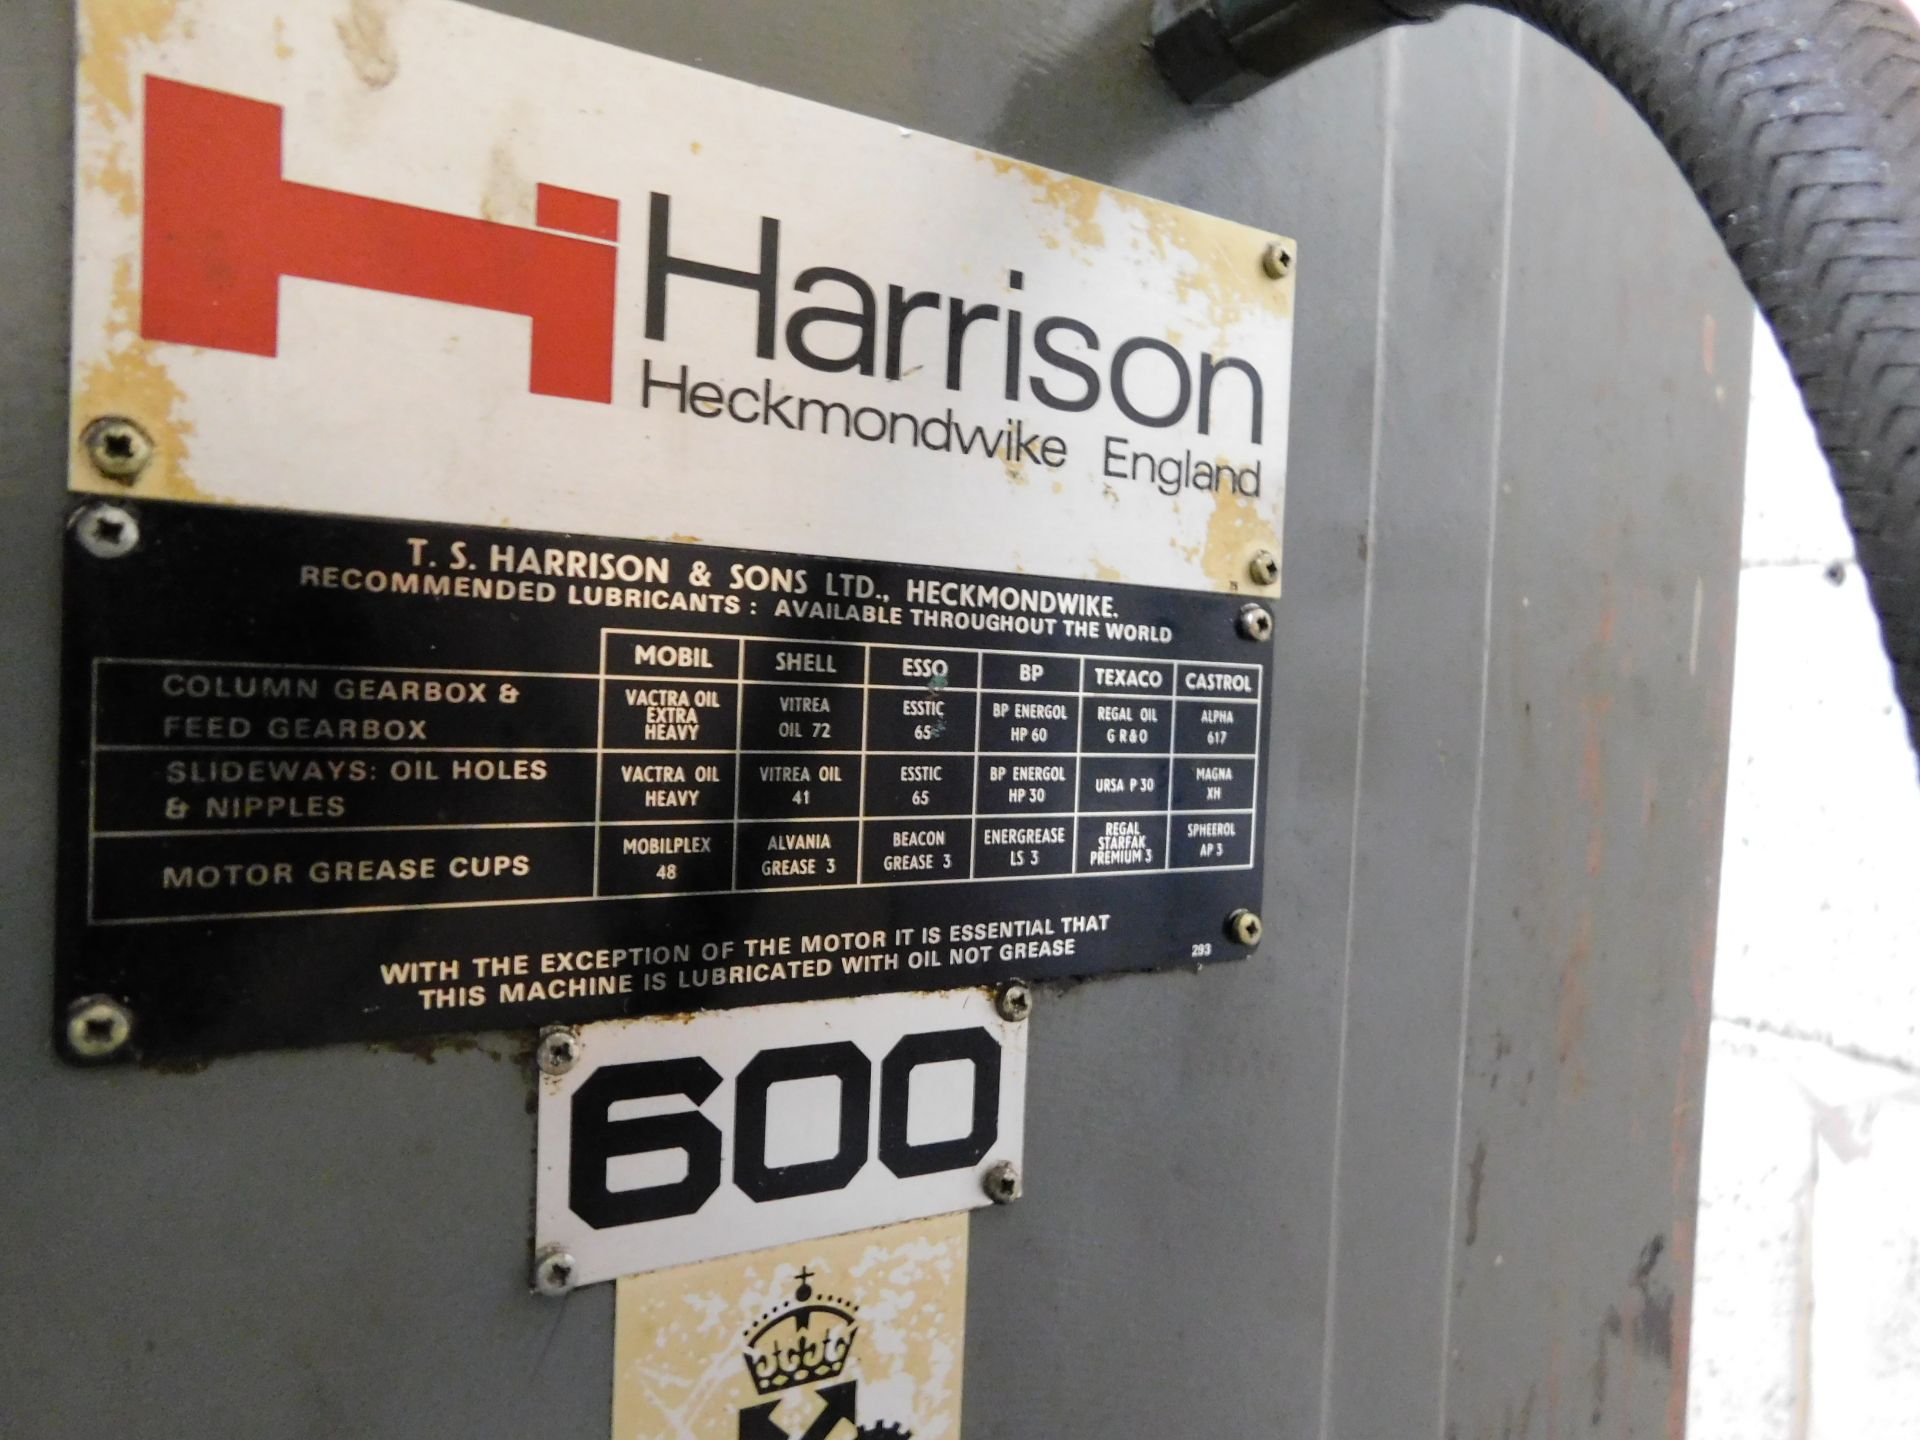 Harrison 600 Surface Grinder with DRO-3 Axis Controller, Serial Number 149041 (Location: Bolton. - Image 14 of 14